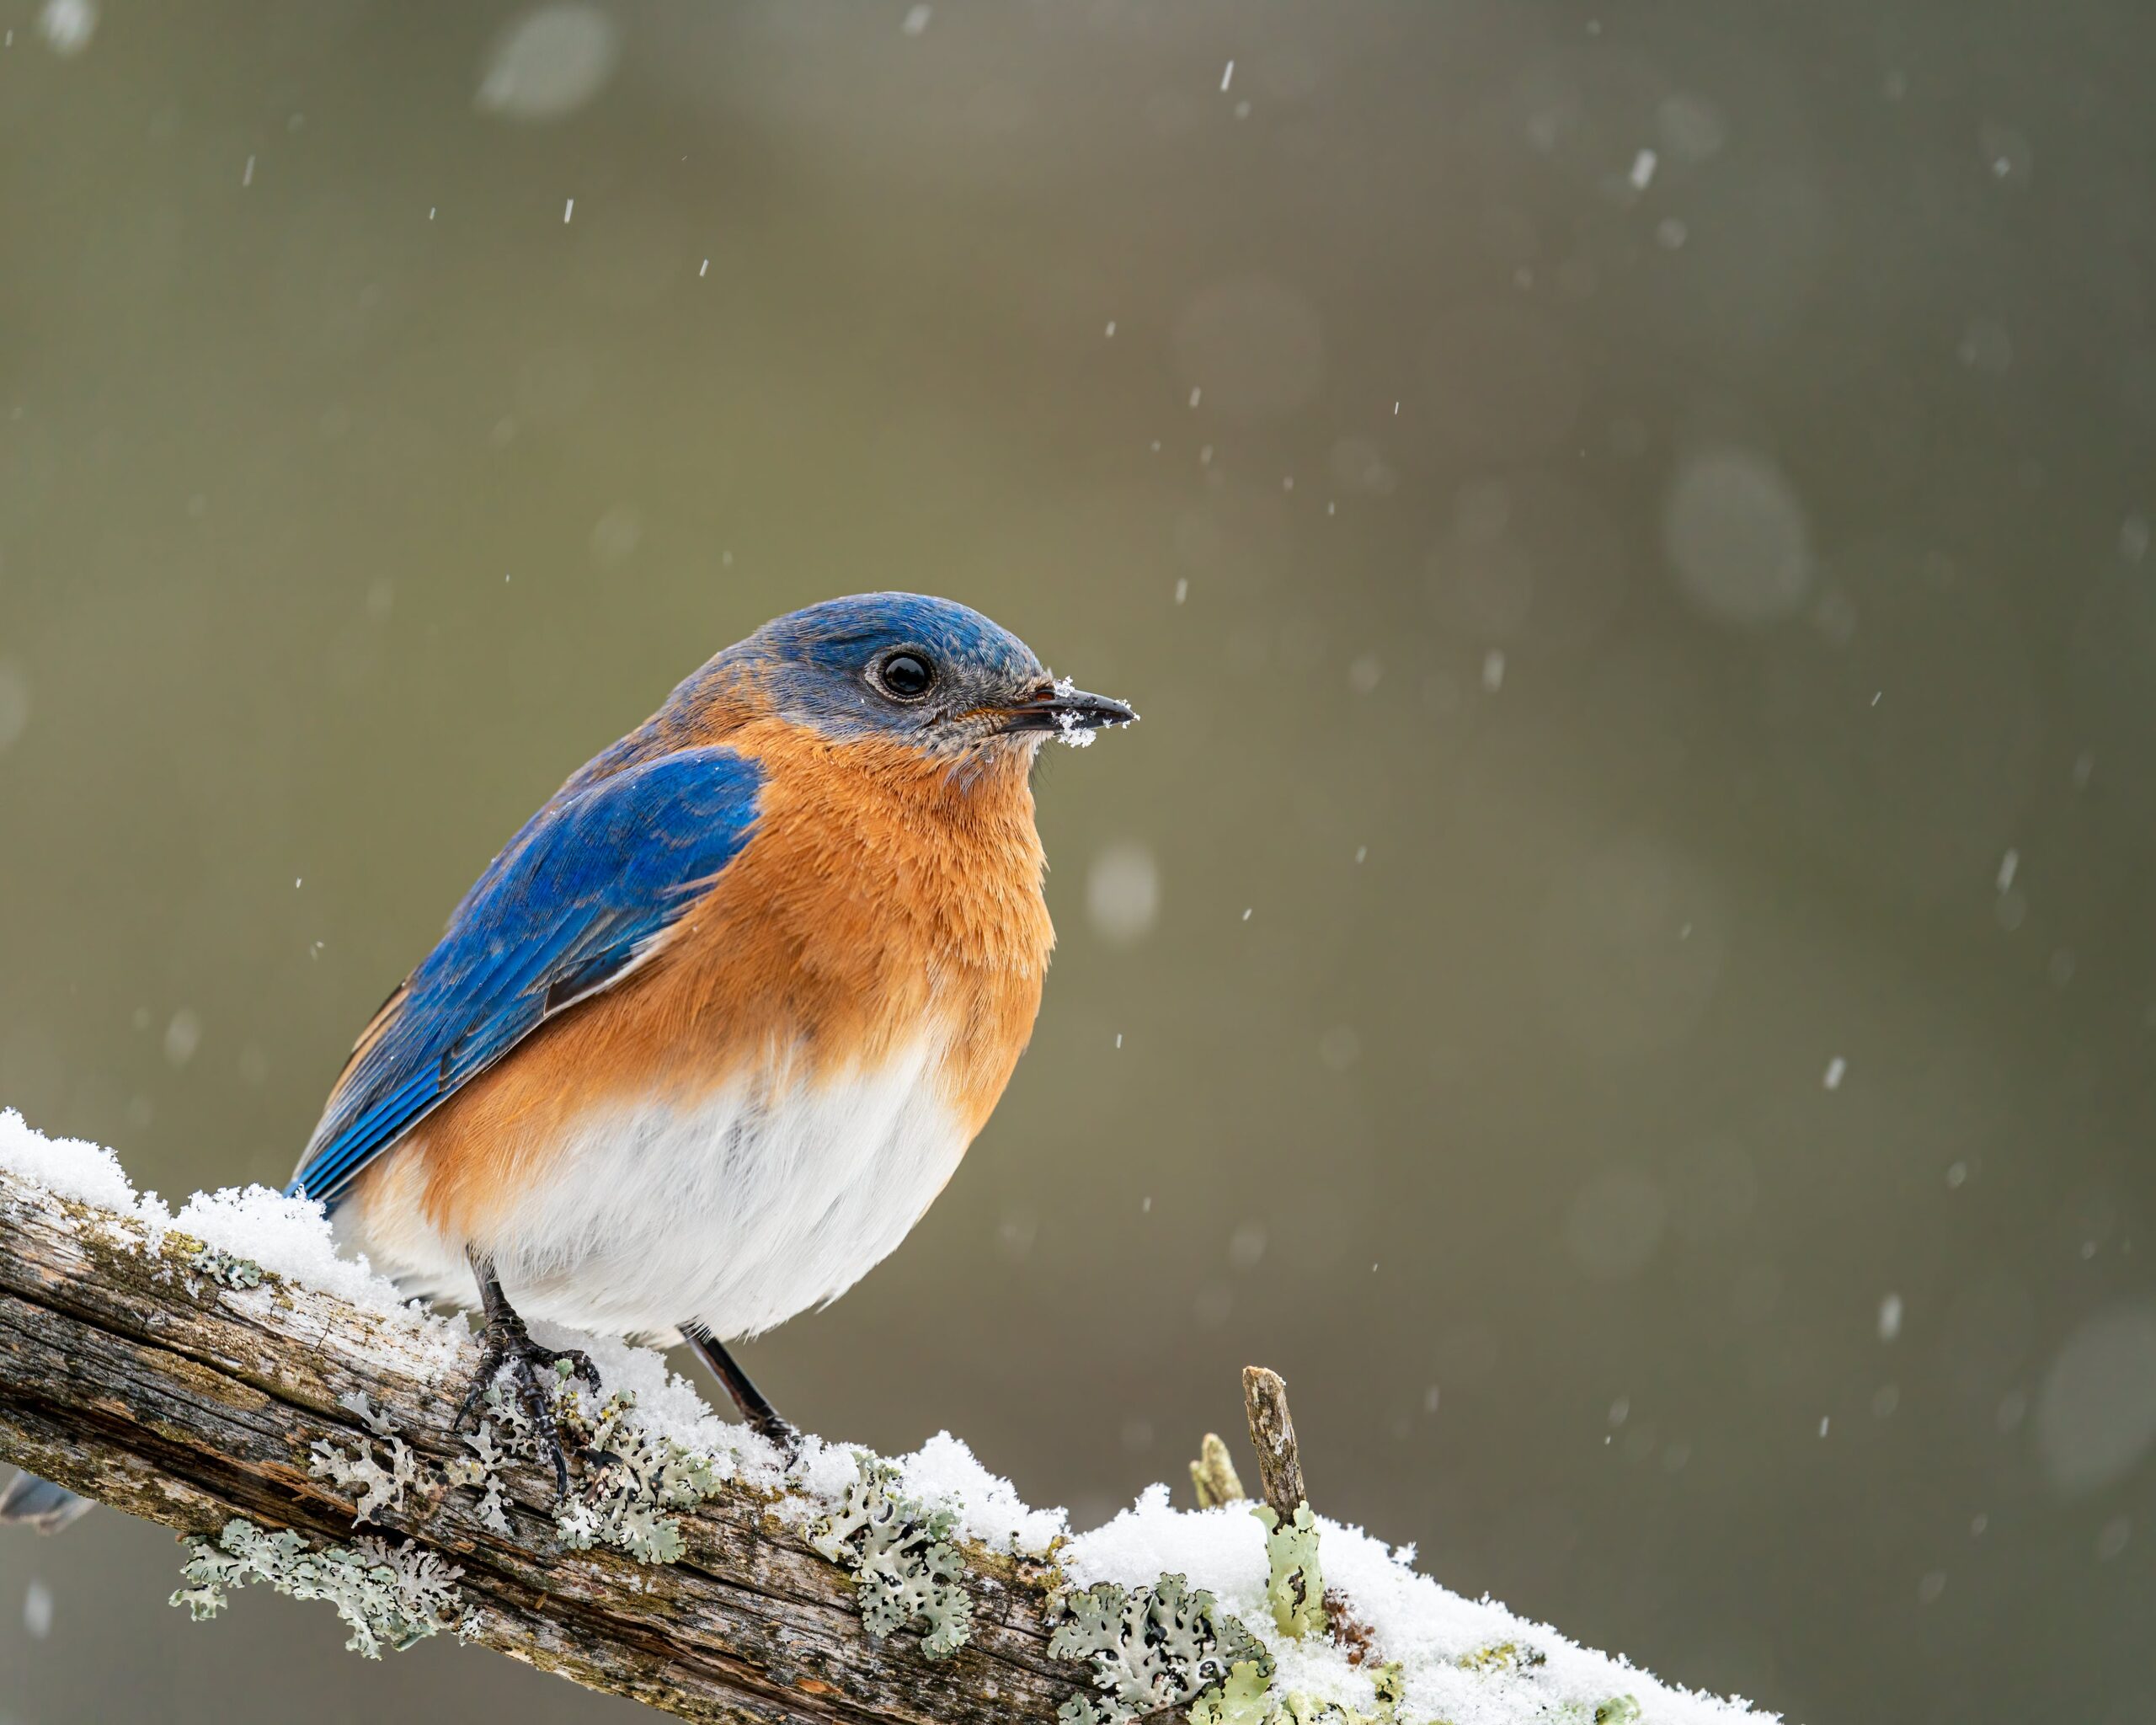 A bluebird ponders the winter landscape from a snowy tree branch.